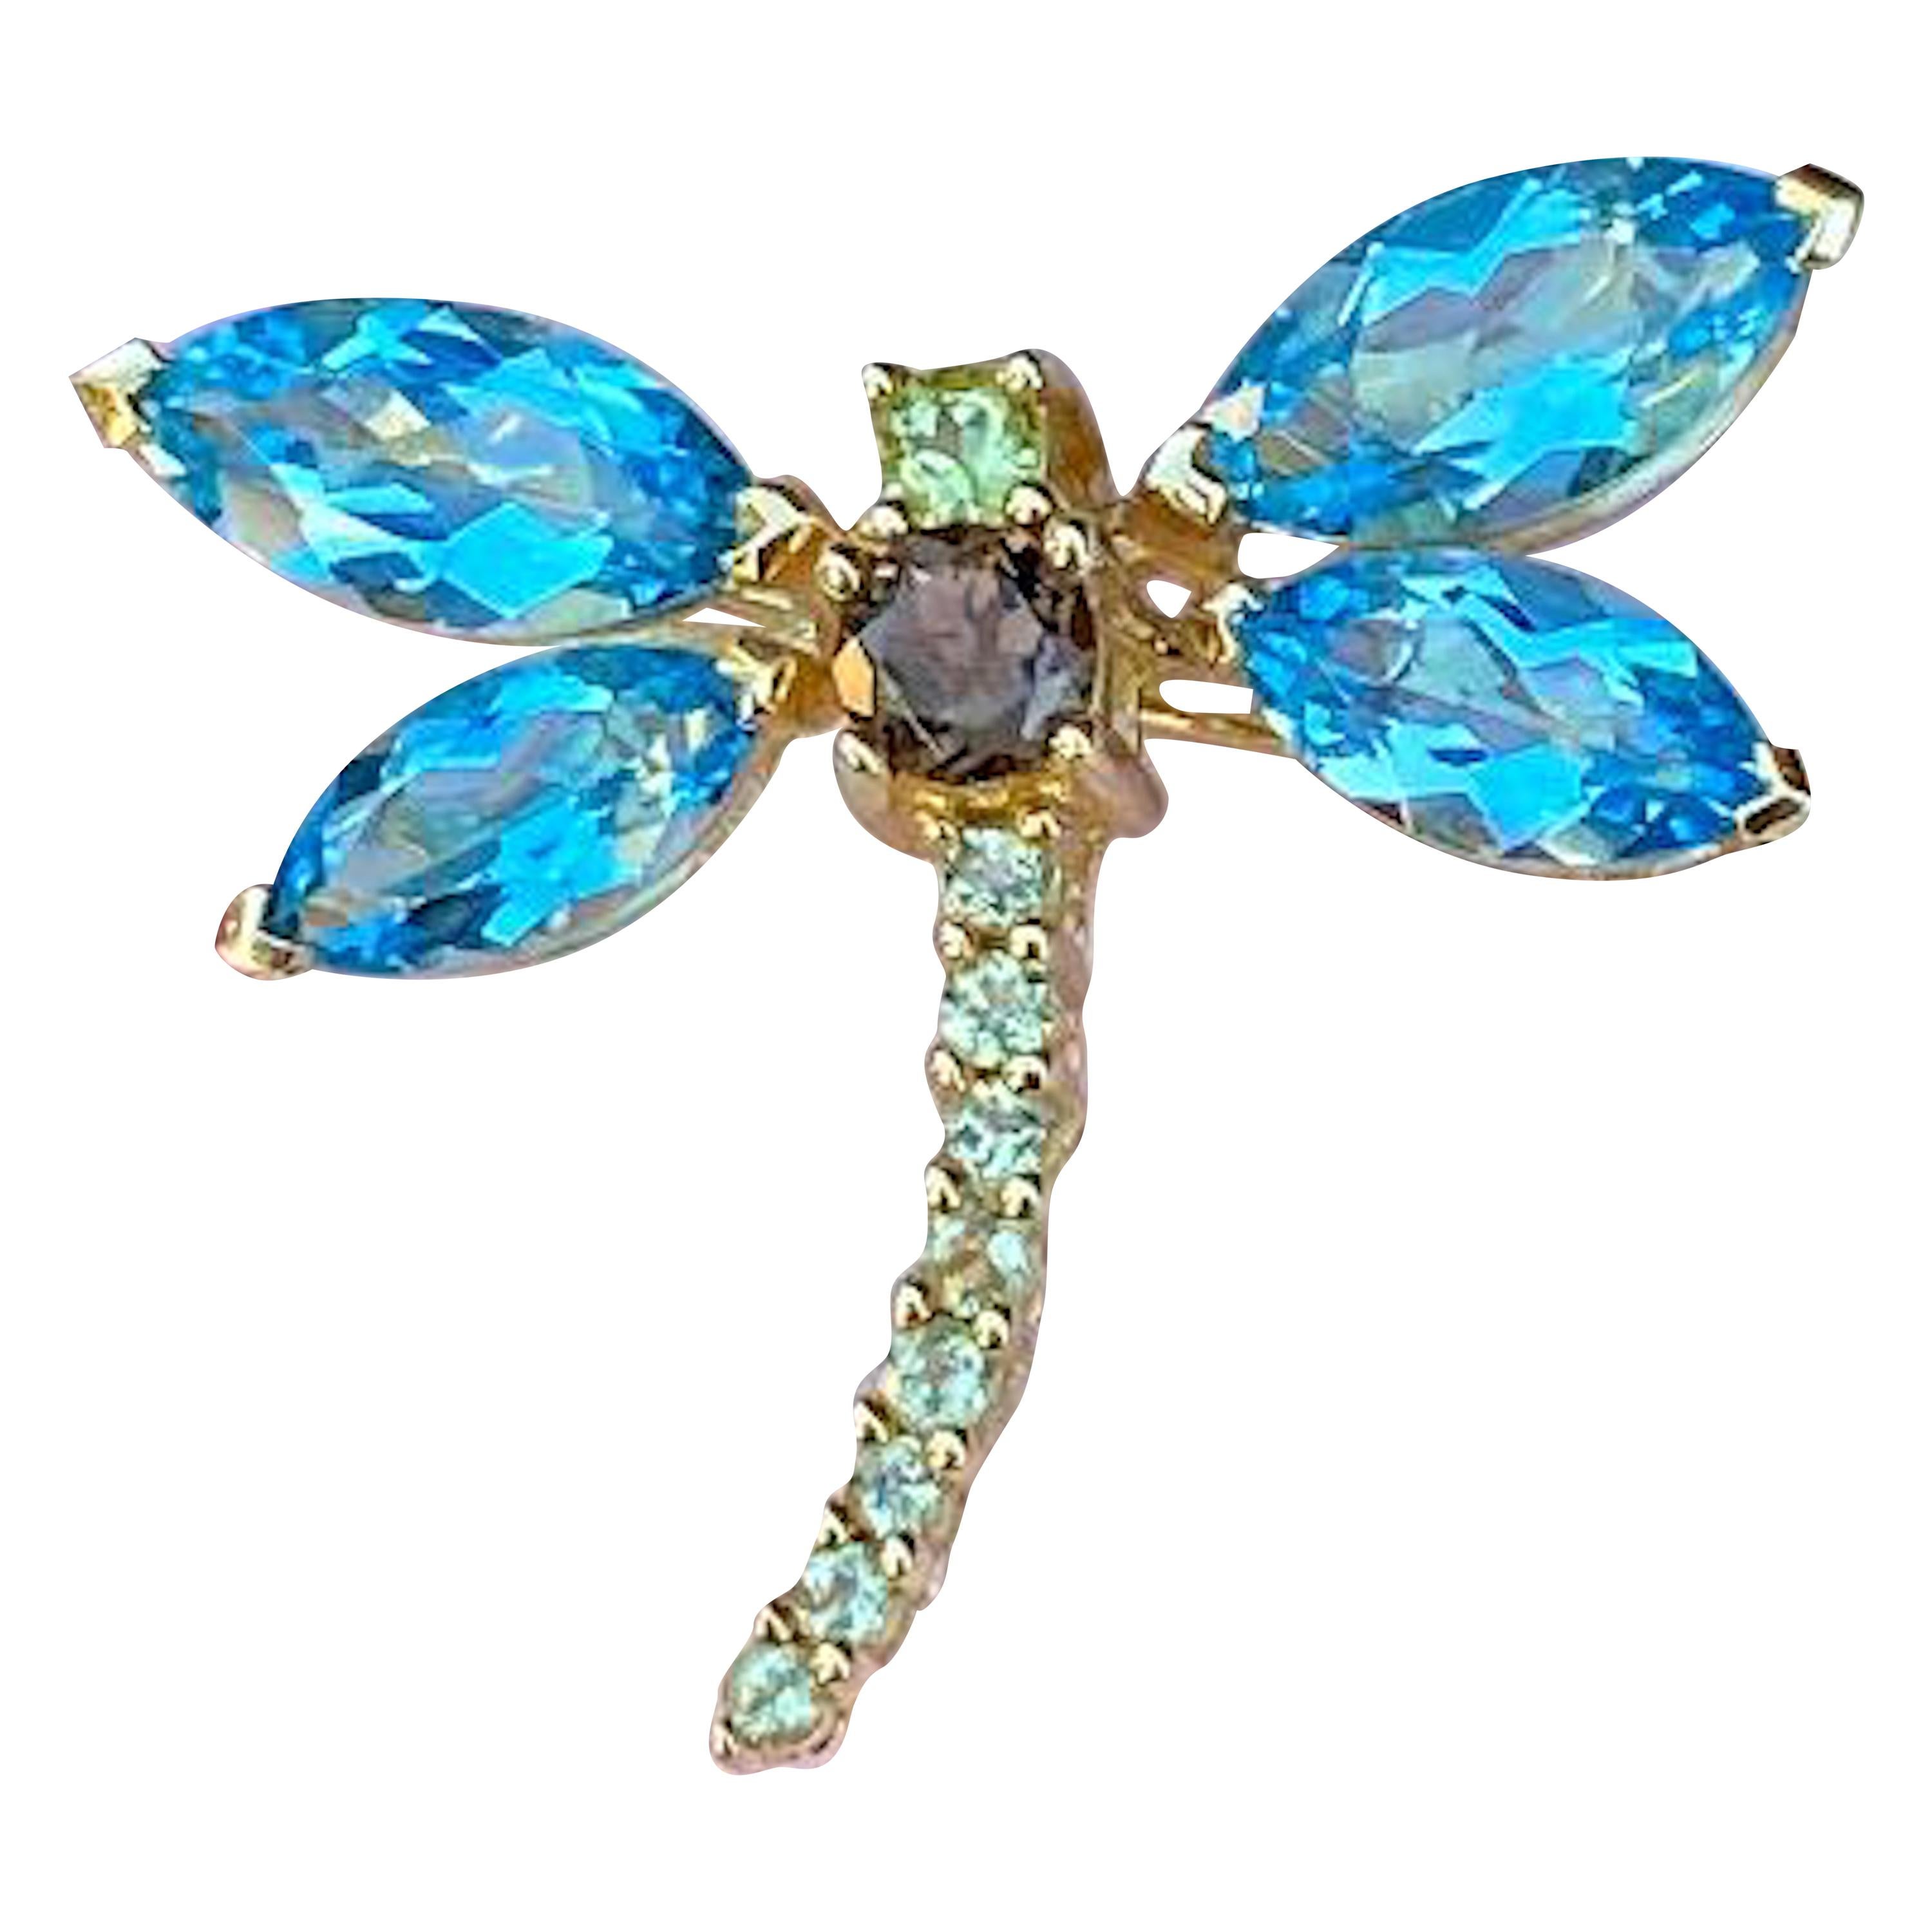 Blue Topaz, Brown Topaz and Peridot Dragonfly 14 Karat Gold Pendant or Brooch